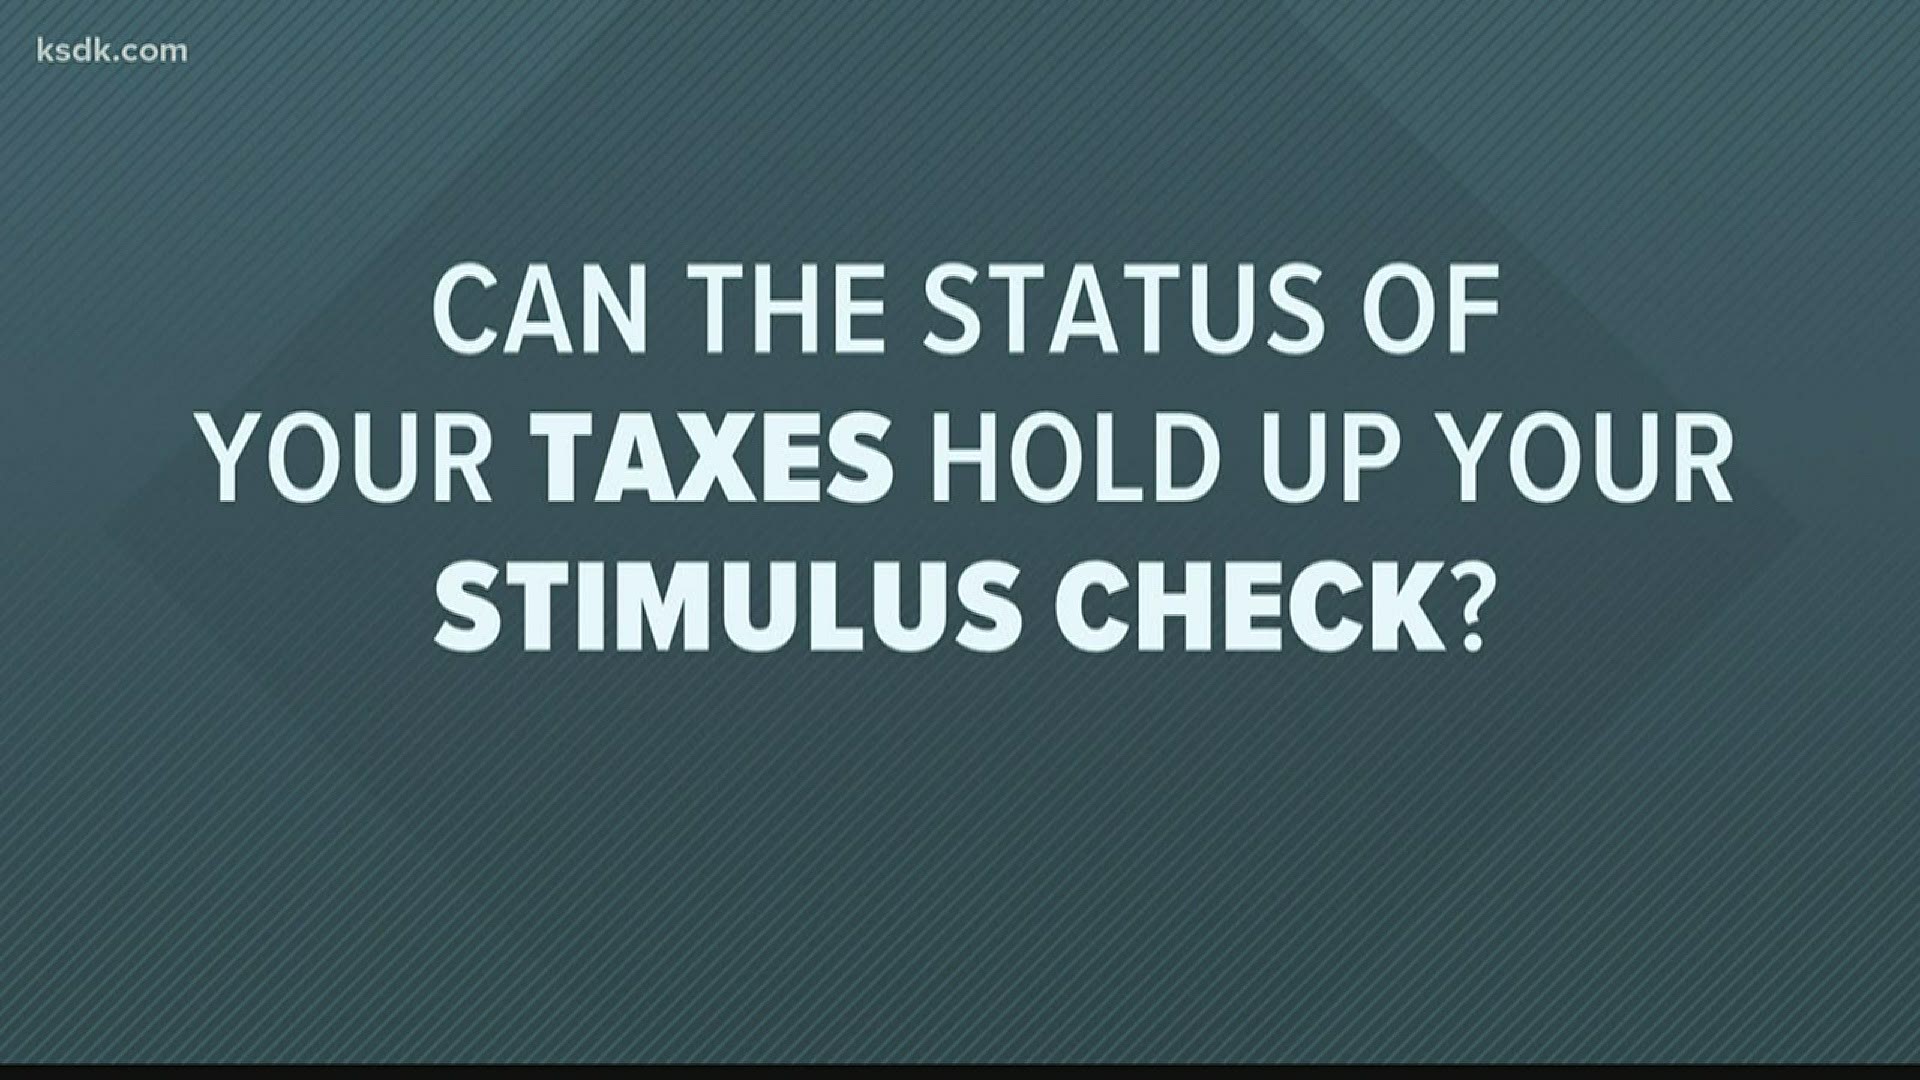 "If someone's 2018 and 2019 tax returns haven't been processed, that could hold up your stimulus check."